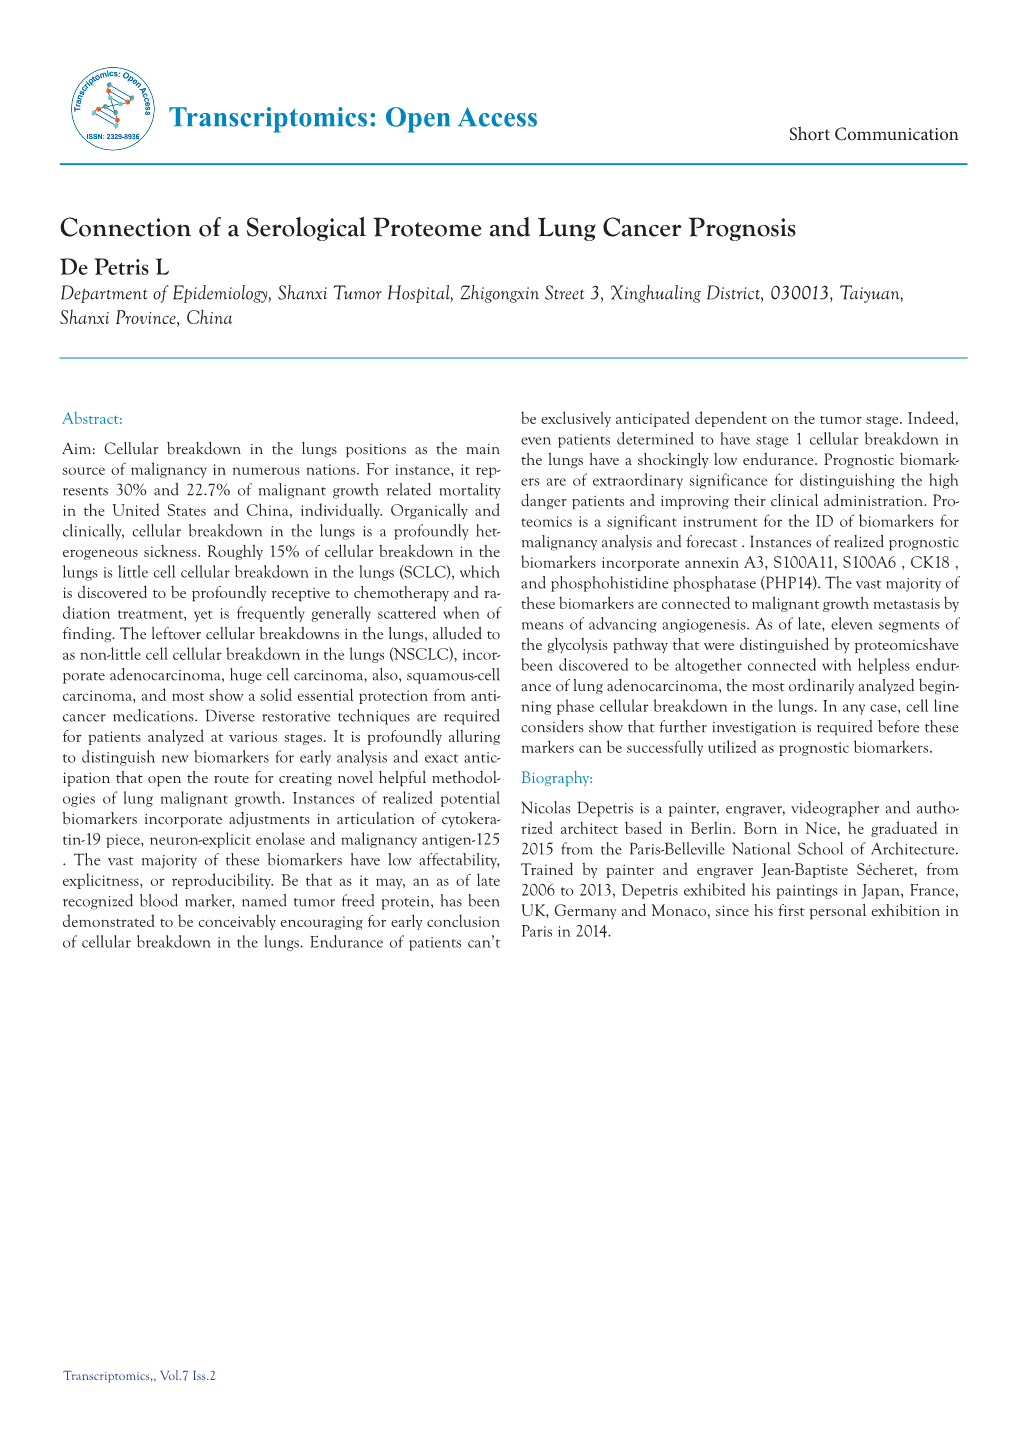 Connection of a Serological Proteome and Lung Cancer Prognosis